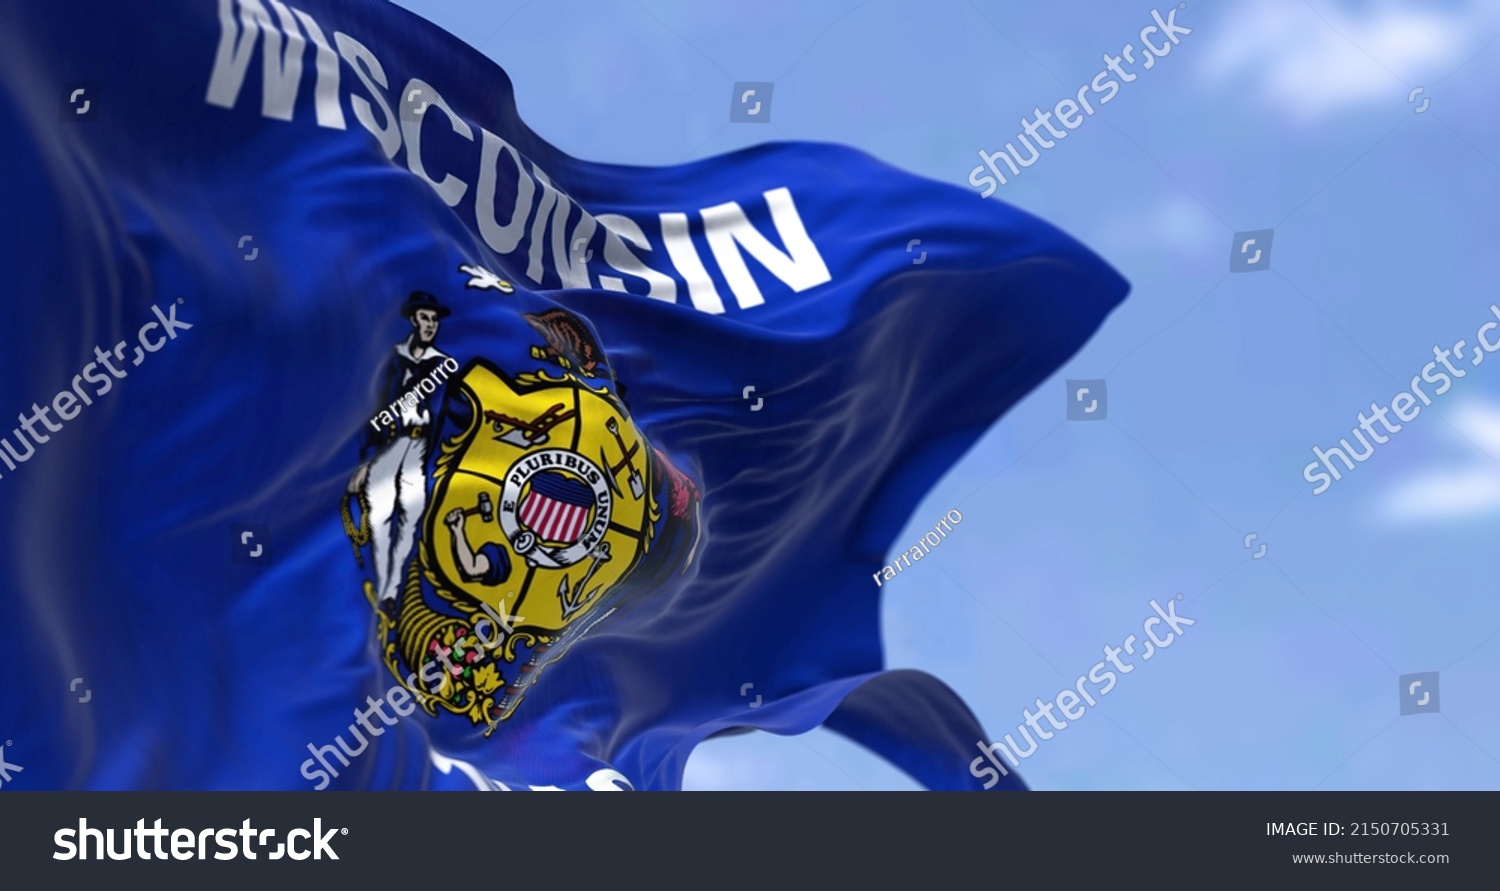 The US state flag of Wisconsin waving in the wind. Wisconsin is a state in the upper Midwestern United States. Democracy and independence. #2150705331